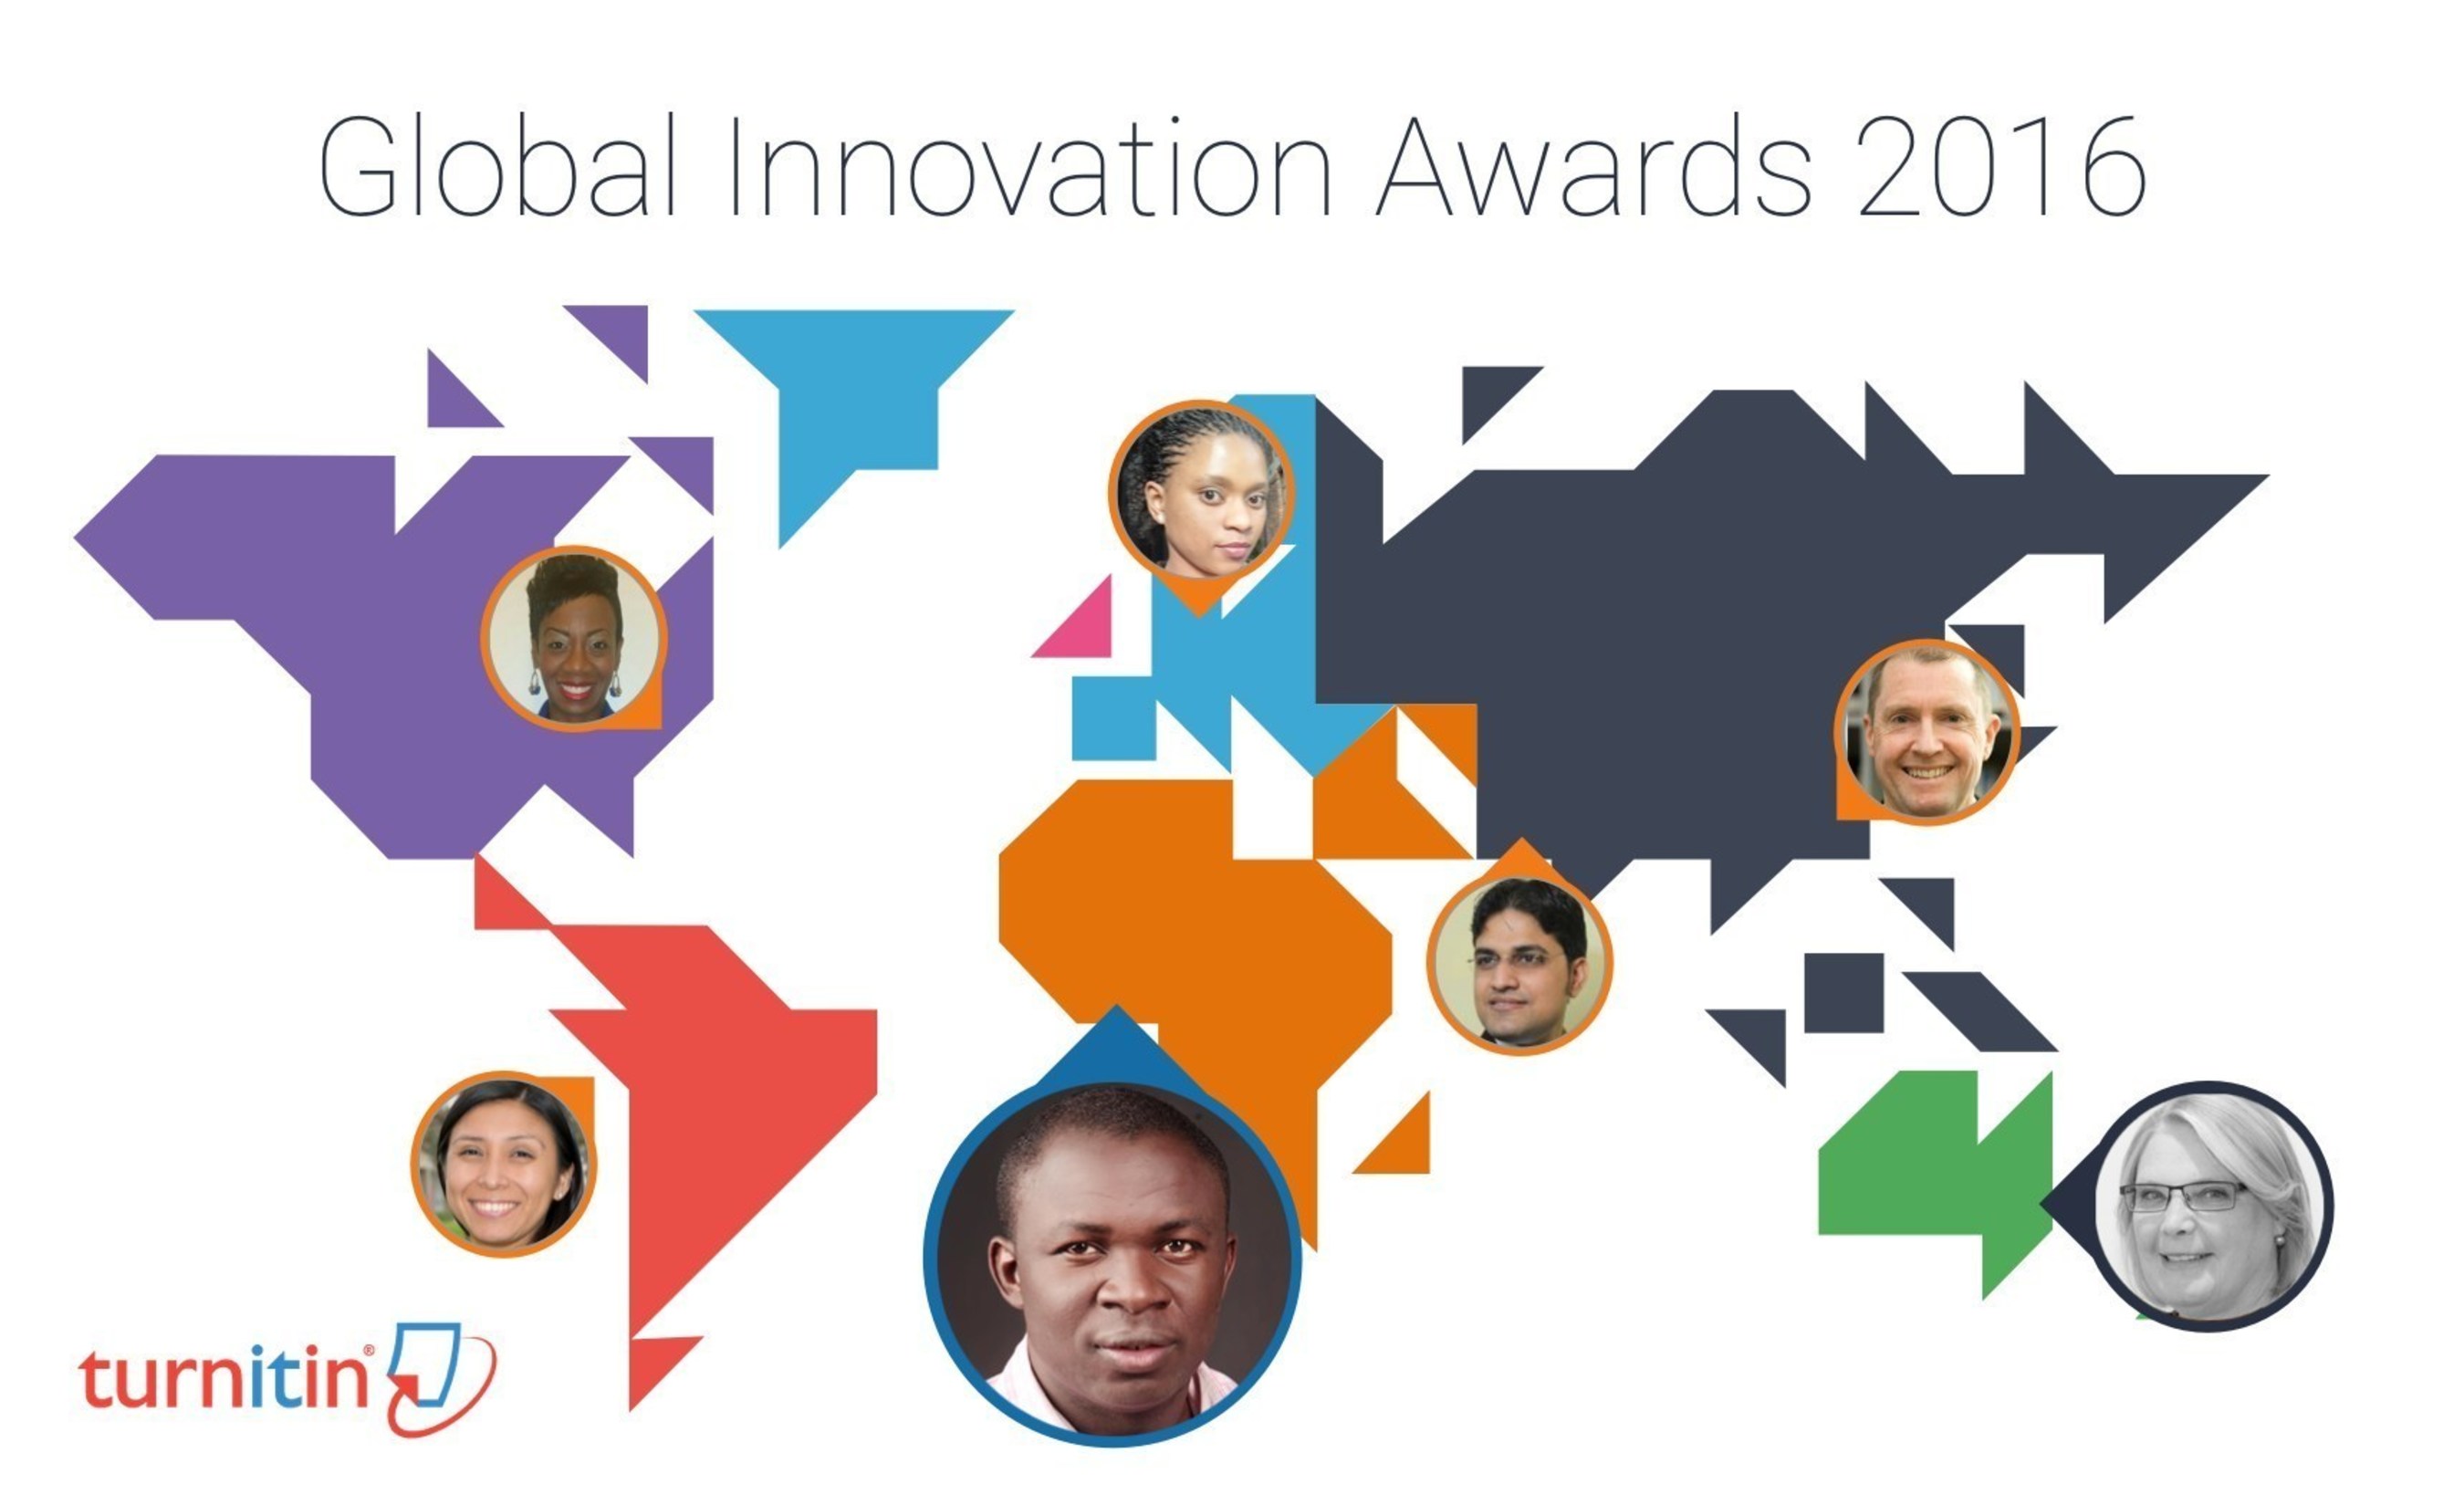 Turnitin recognized 58 educators in 21 countries for their dedication and innovation in academic integrity and student engagement in the 2016 Global Innovation Awards.